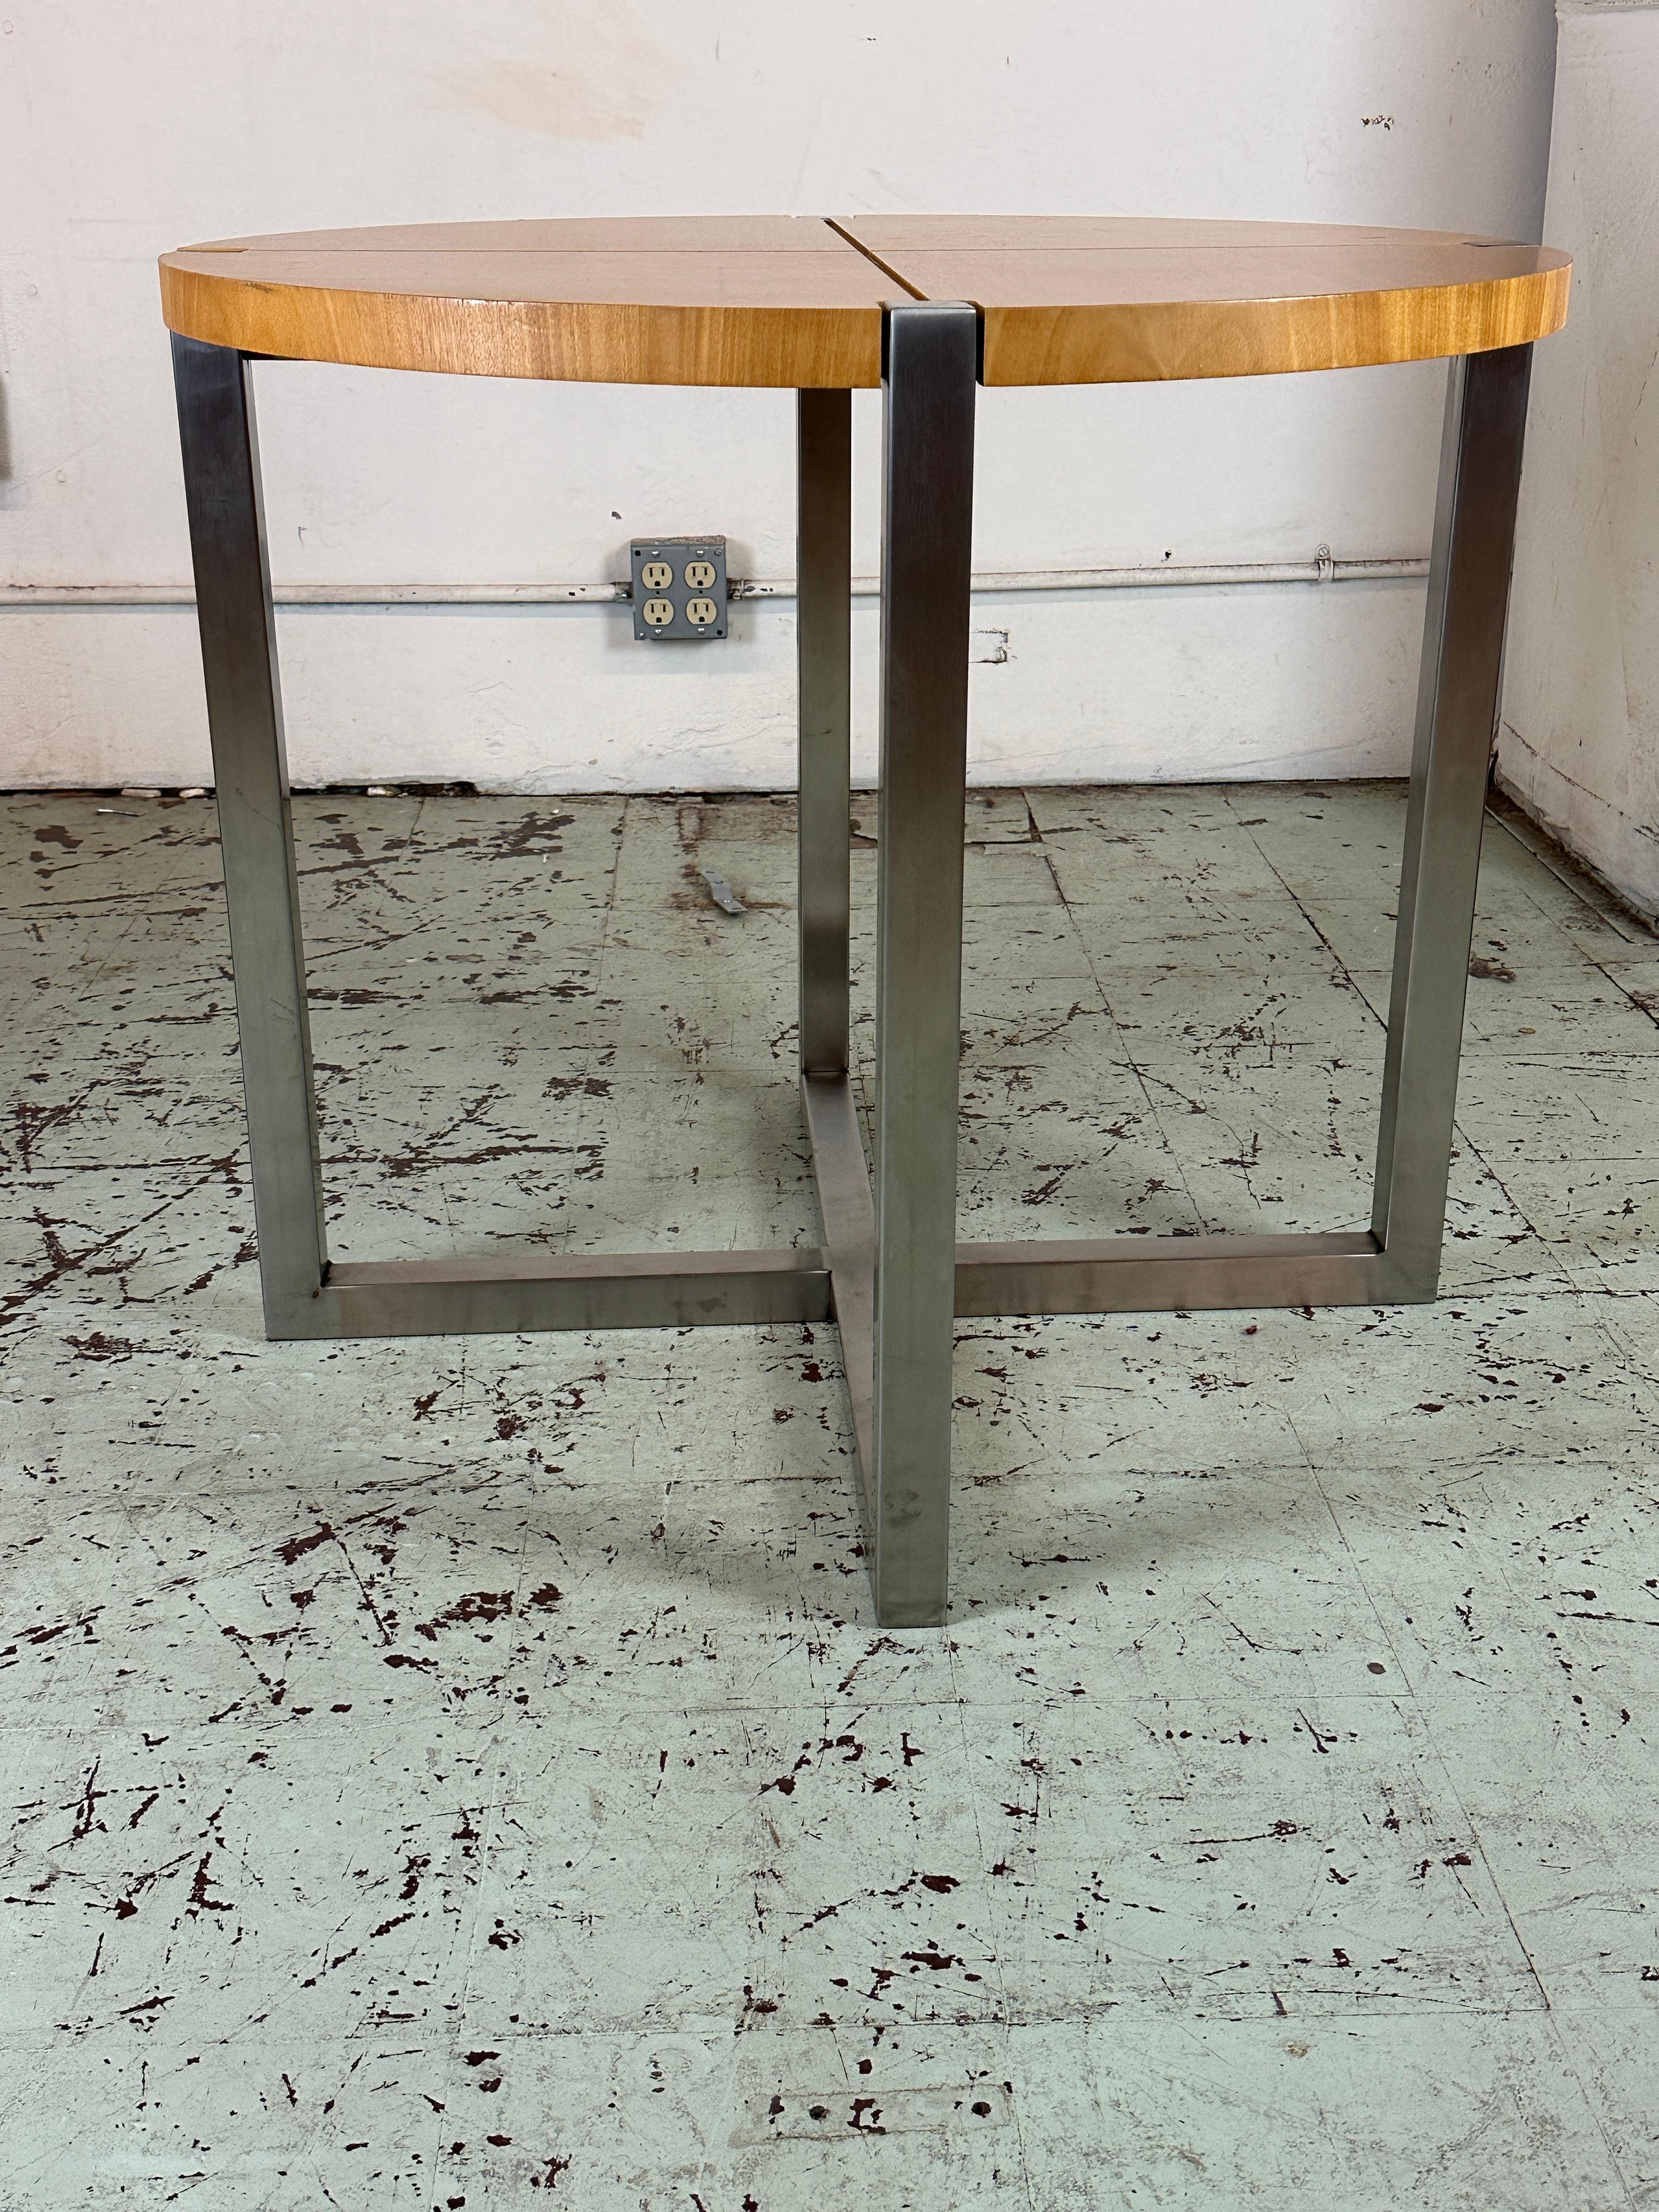 These gueridons or end tables feature a sycamore top split in 4 quarters by a chrome insert matching the base bottom. The legs are made of chromed steel.